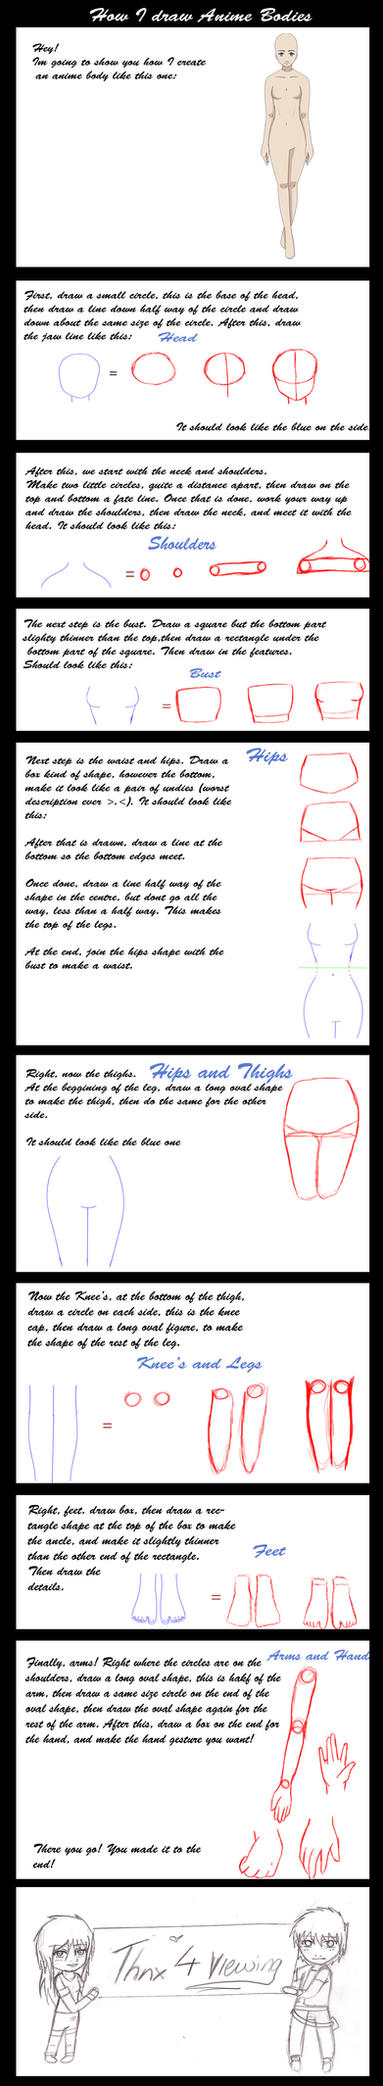 How to Draw Anime Body Parts: The Neck and Shoulders